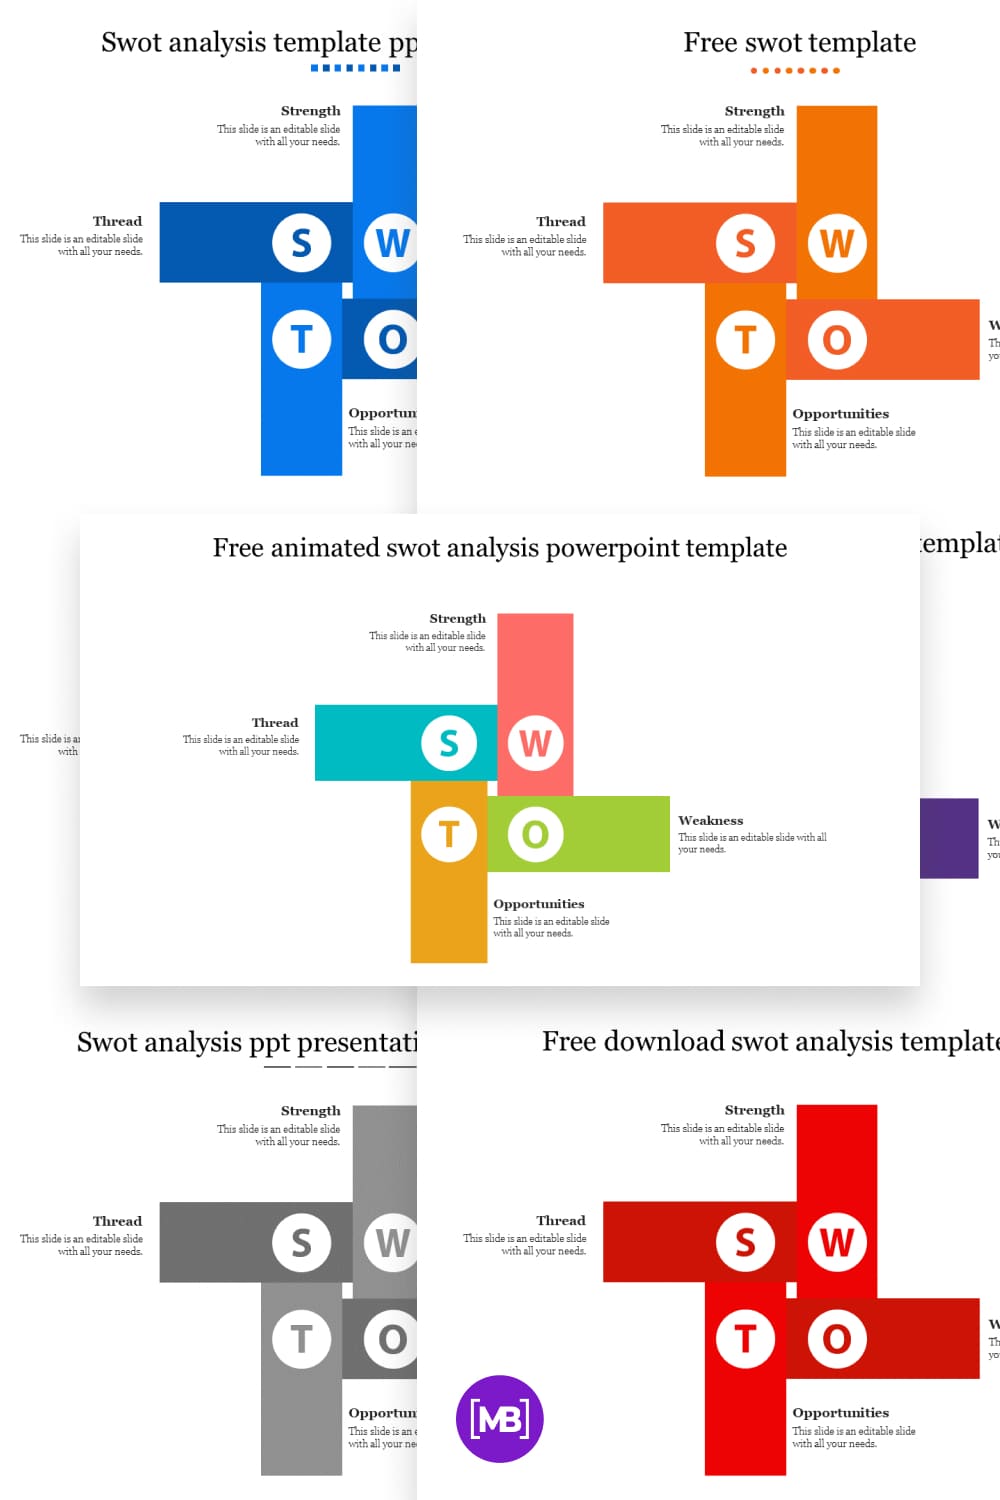 Free animated swot analysis powerpoint template design.